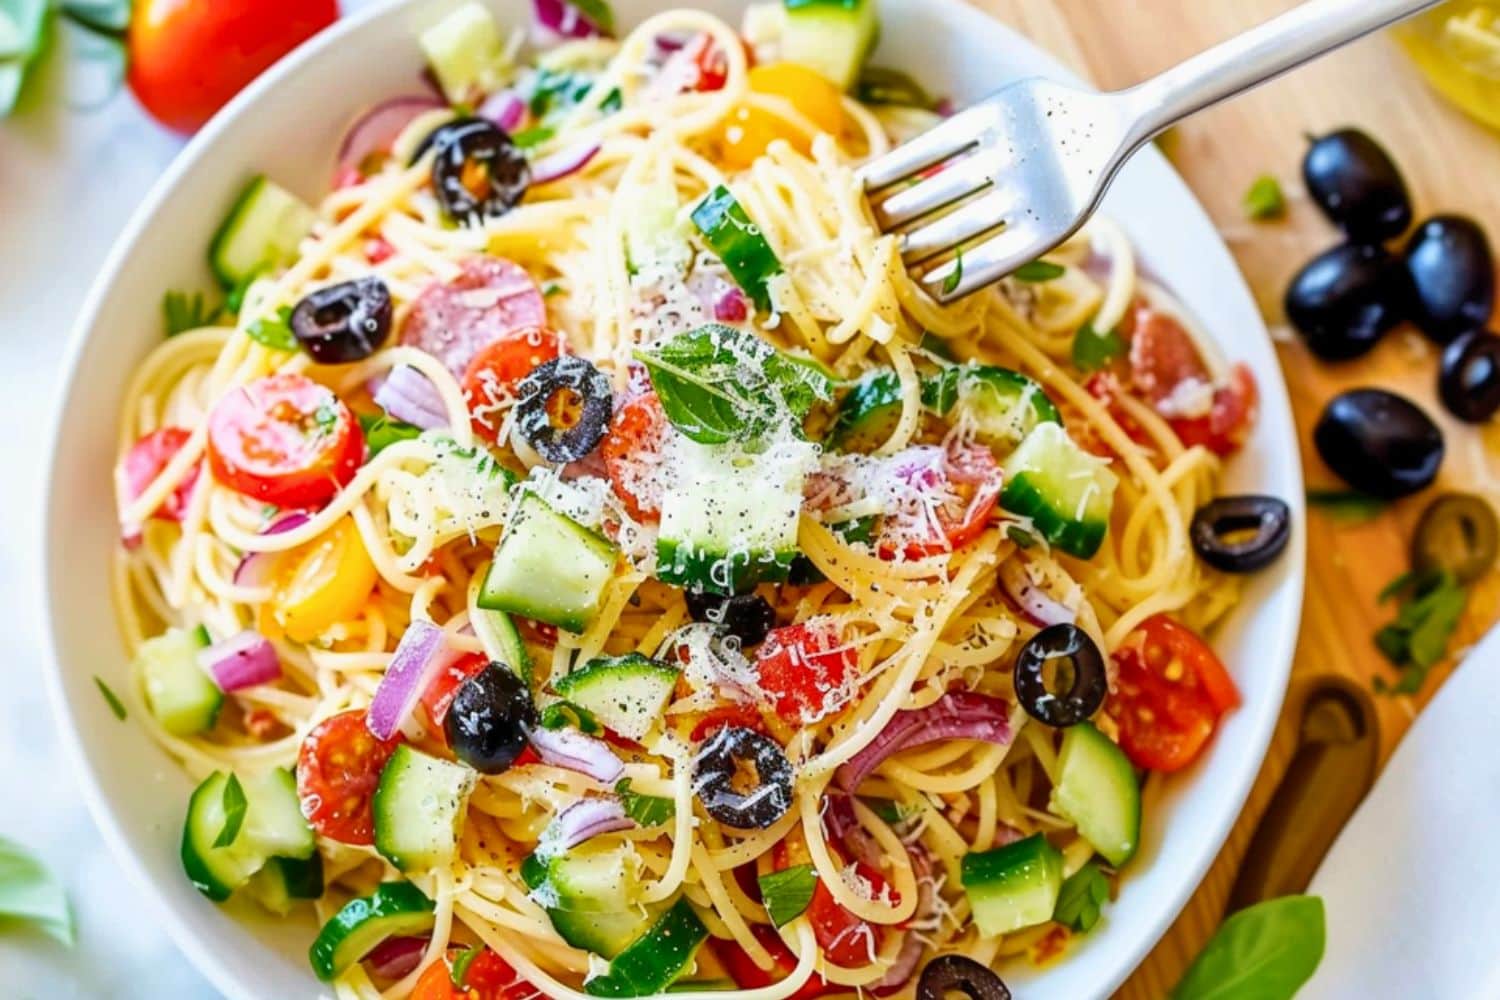 Spaghetti salad made with thin spaghetti broken into thirds, grated Parmesan cheese, seeded and chopped red bell pepper, thinly sliced red onion, halved cherry tomatoes, and mini pepperoni, sliced black olives served in a white plate, fork on the side.